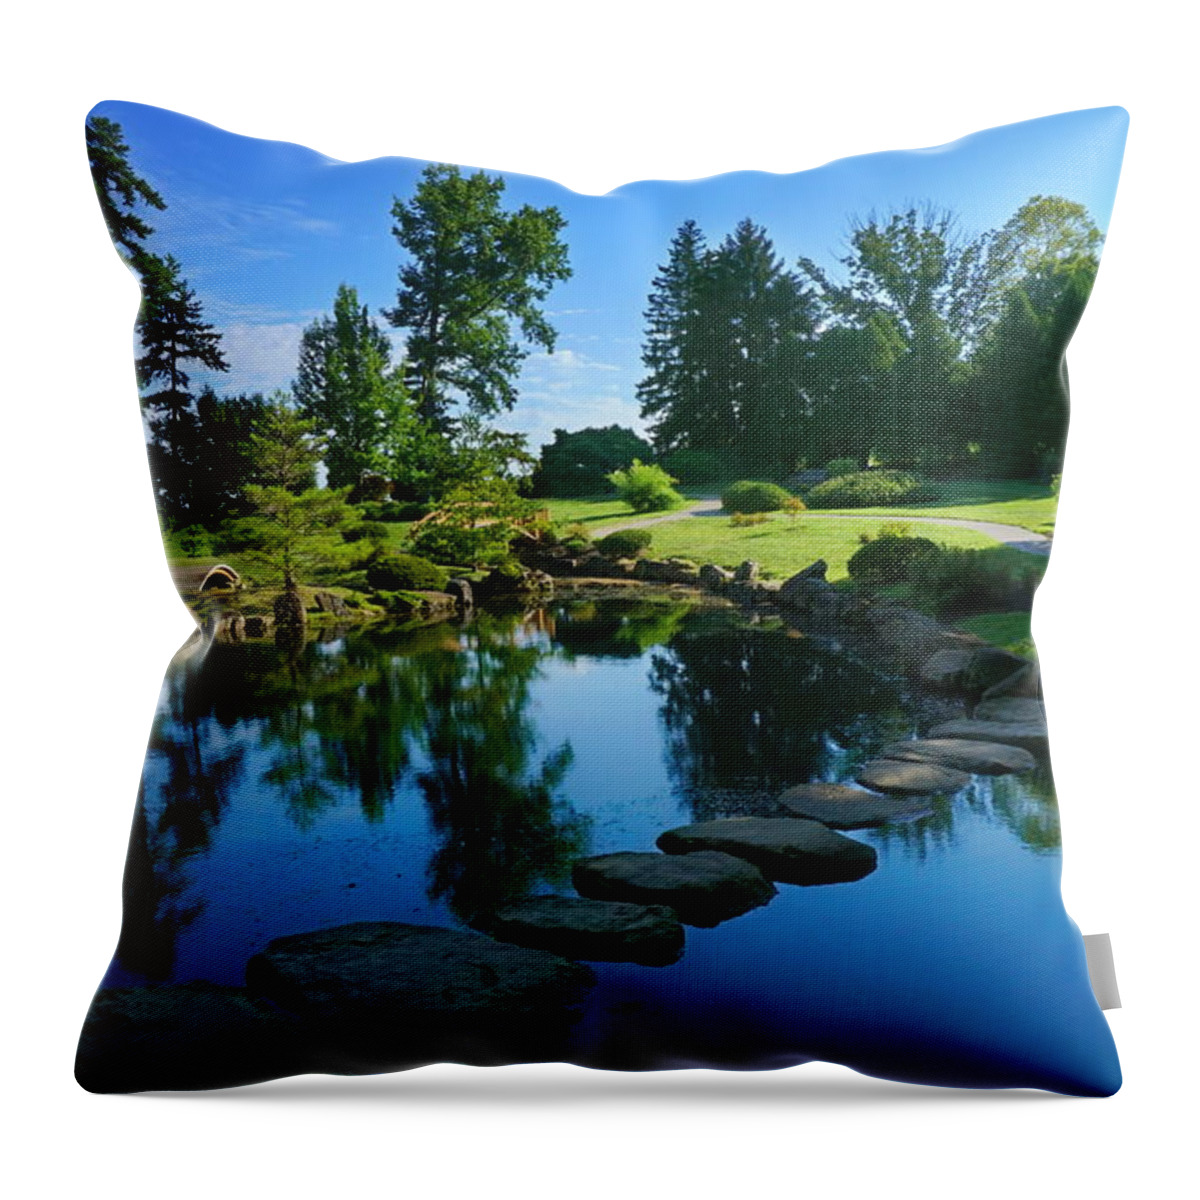 Dawes Throw Pillow featuring the photograph Tranquility by Amanda Jones